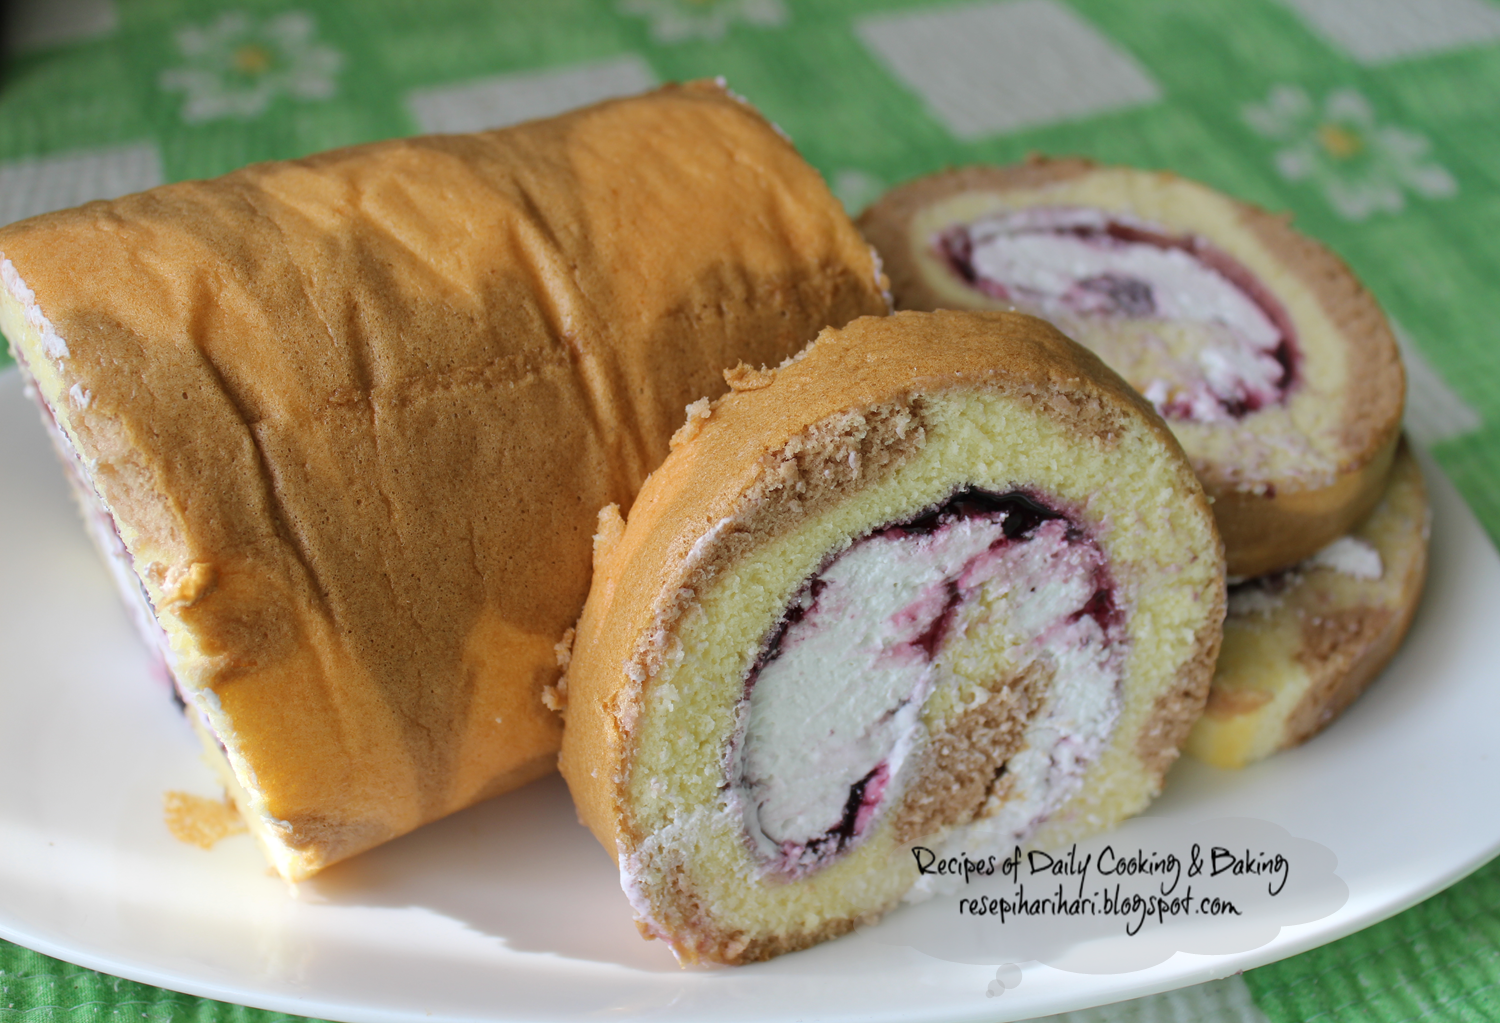 Recipes of Daily Cooking and Baking : Blueberry Swiss Roll 